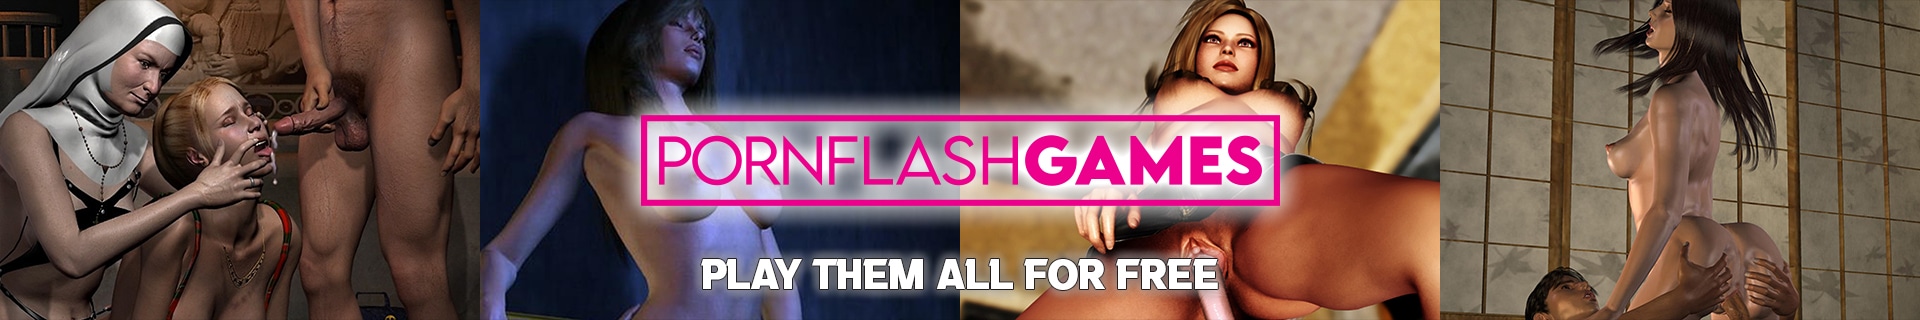 Sex flash games in Hohhot